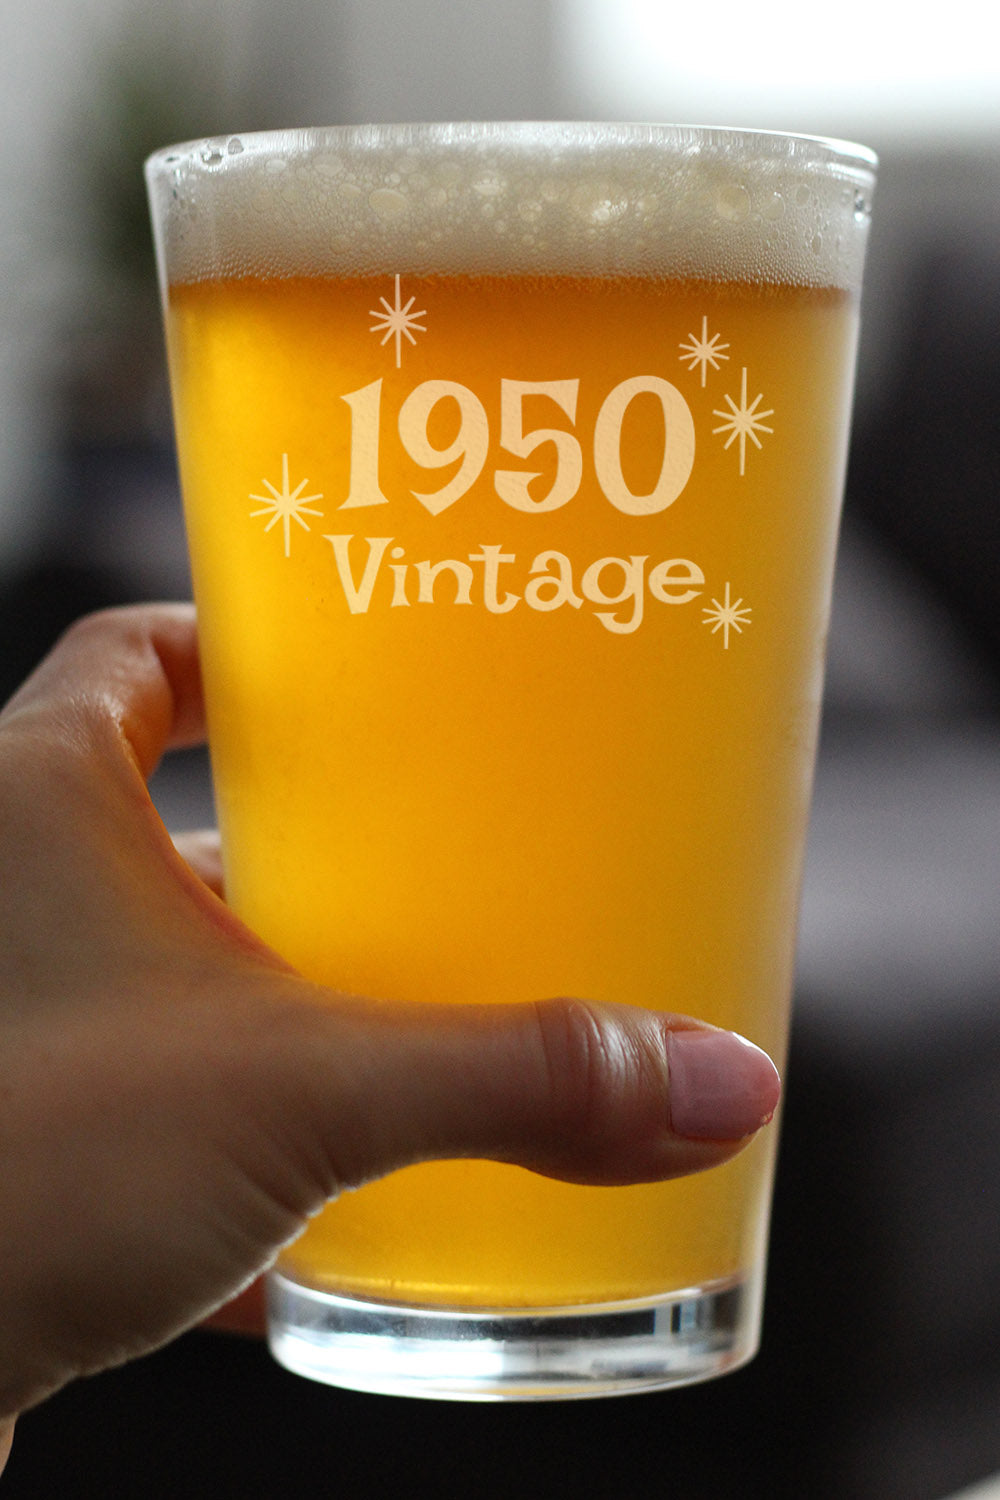 Vintage 1950 - Pint Glass for Beer - 73rd Birthday Gifts for Men or Women Turning 73 - Fun Bday Party Decor - 16 oz